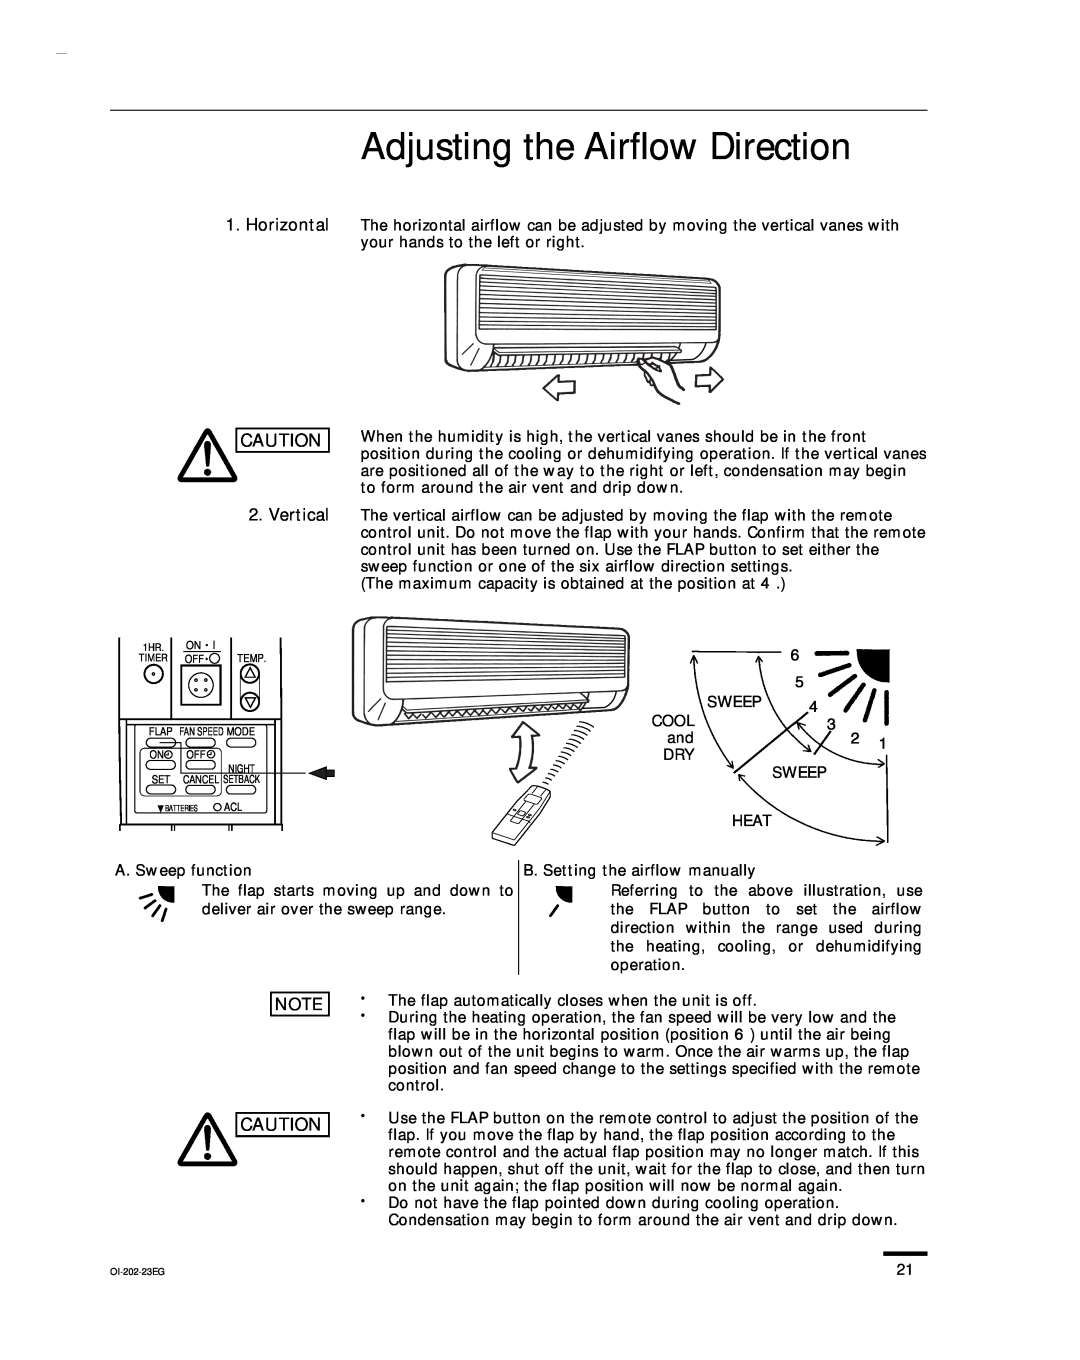 Sanyo KHS1852-S, CH1852, CH0952 service manual Adjusting the Airflow Direction, Horizontal, Vertical 